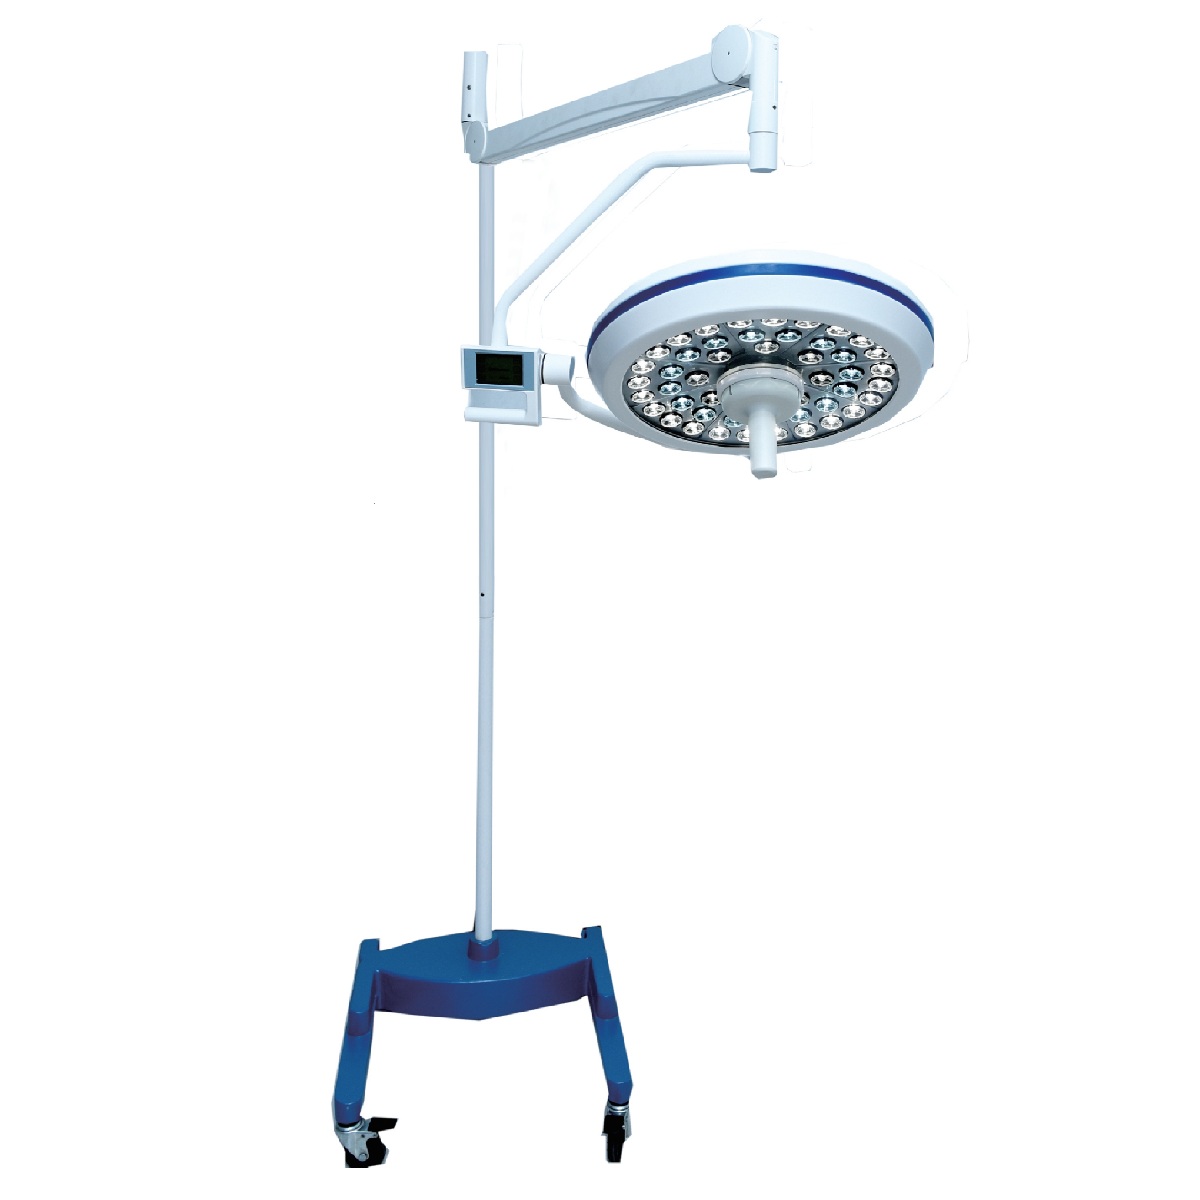 FL520D LED shadowless operating light Featured Image